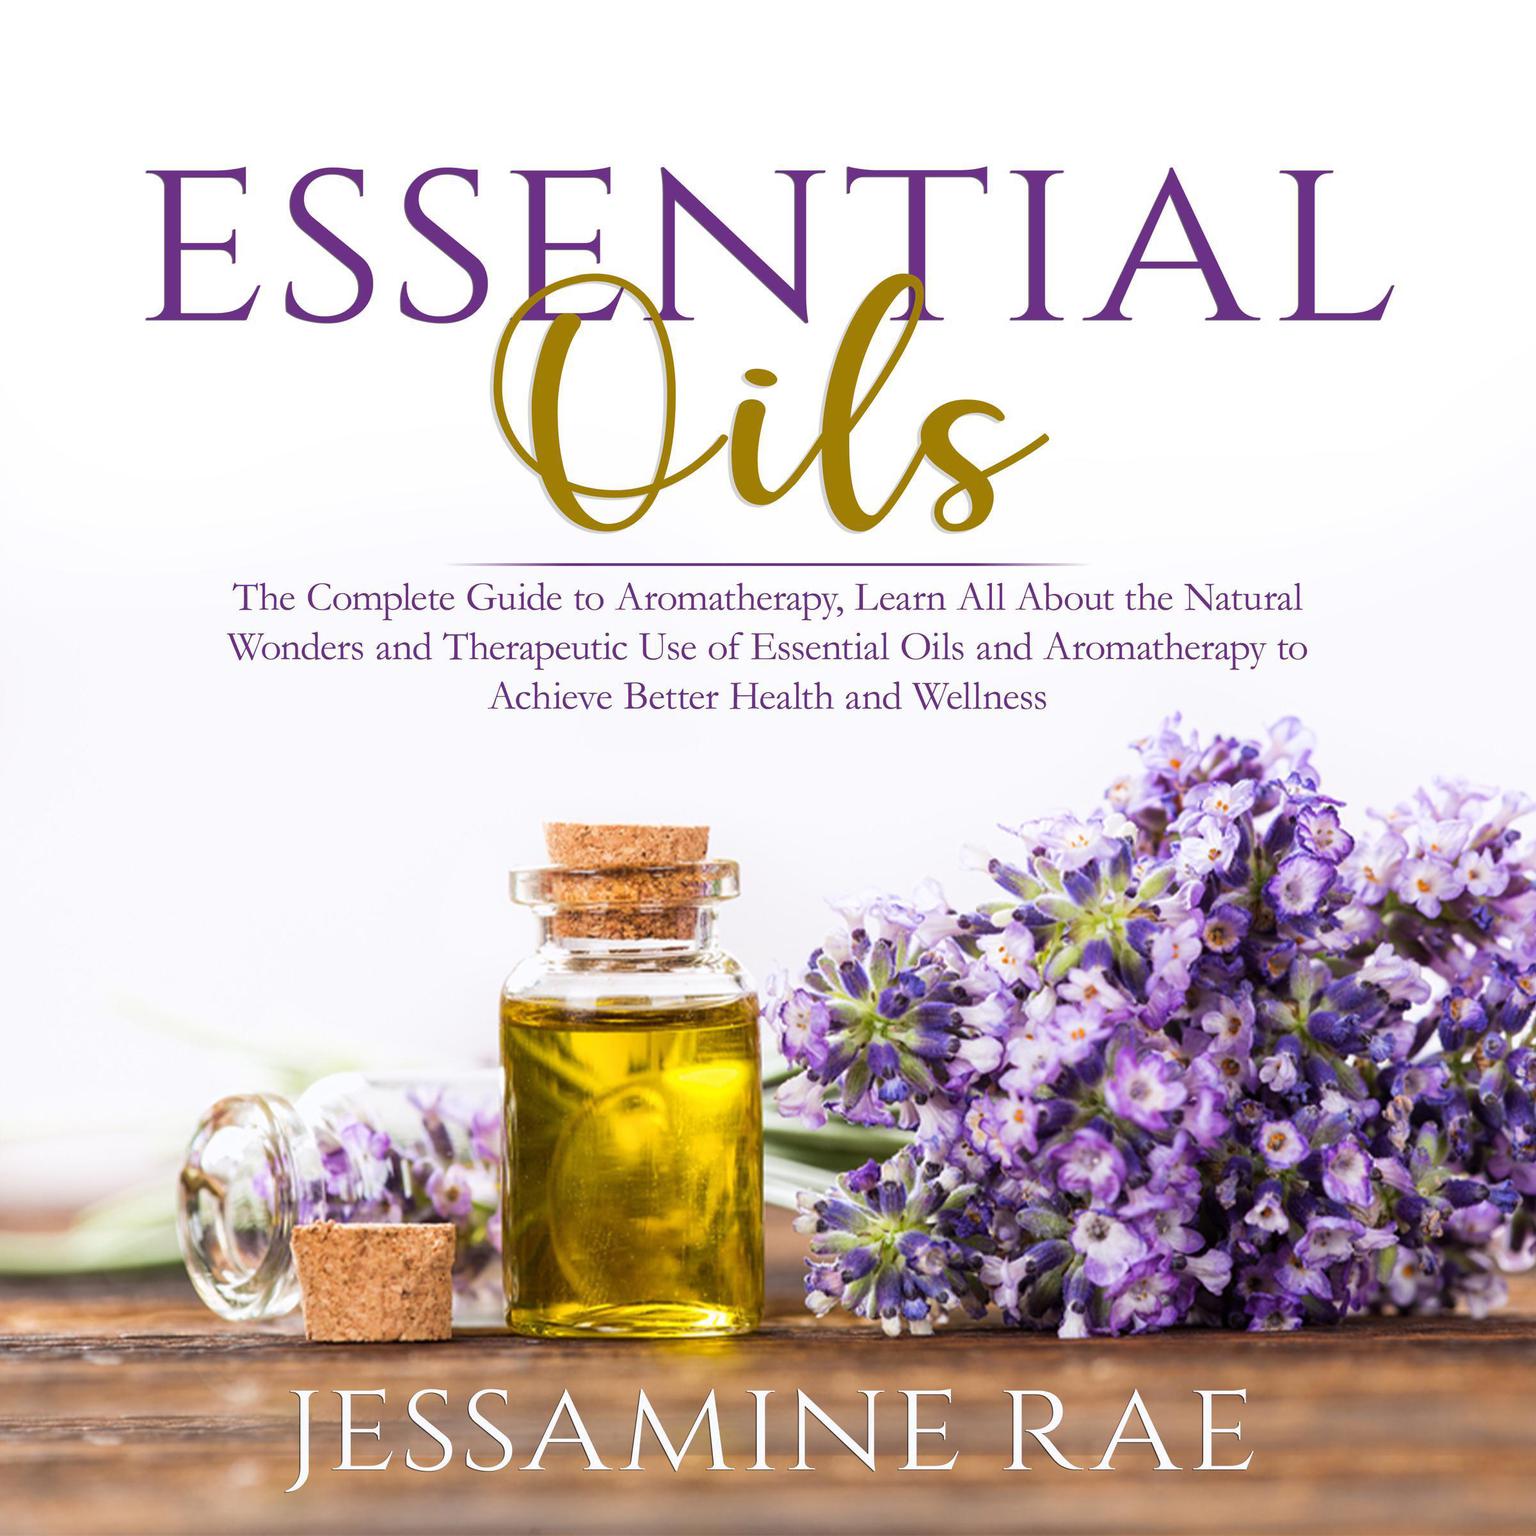 Essential Oils: The Complete Guide to Aromatherapy, Learn All About the Natural Wonders and Therapeutic Use of Essential Oils and Aromatherapy to Achieve Better Health and Wellness  Audiobook, by Jessamine Rae